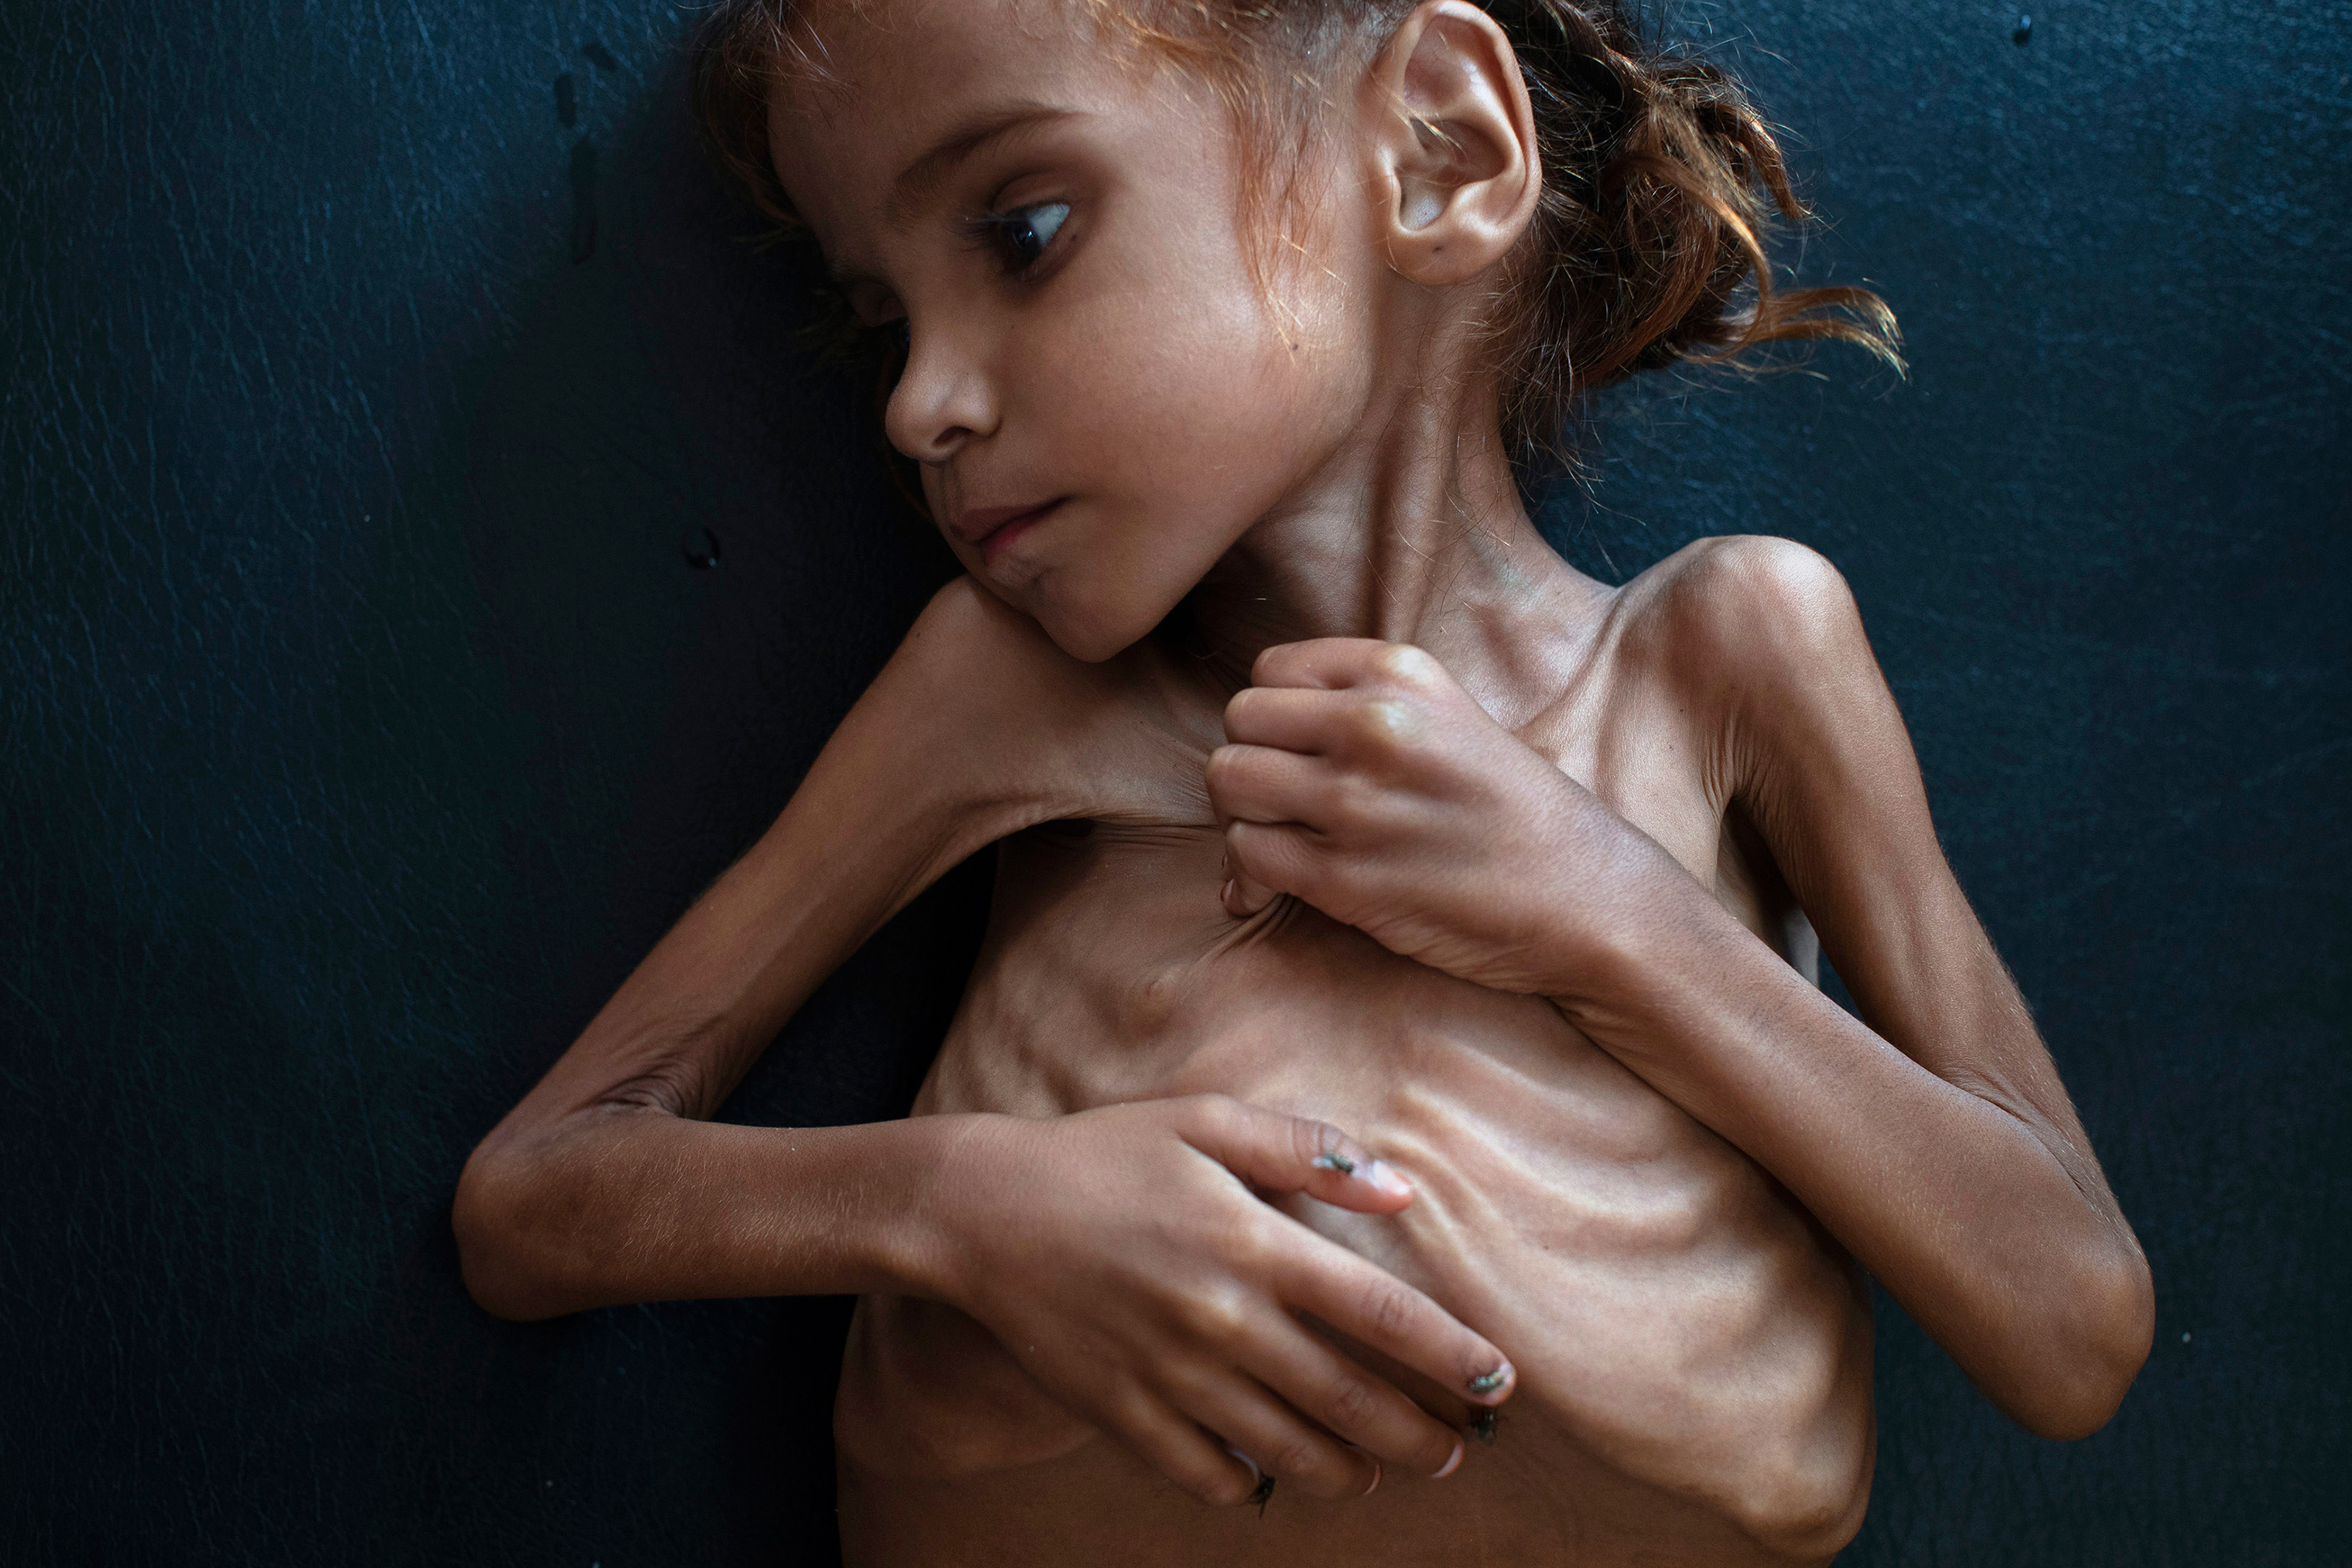 This image of 7-year-old Amal Hussain in October drew global attention to the humanitarian crisis caused by the Saudi-led war in Yemen, where the U.N. says 14 million could be on the edge of starvation. On Nov. 1, Amal’s family said she had died in a refugee camp. (Tyler Hicks—The New York Times/Redux)